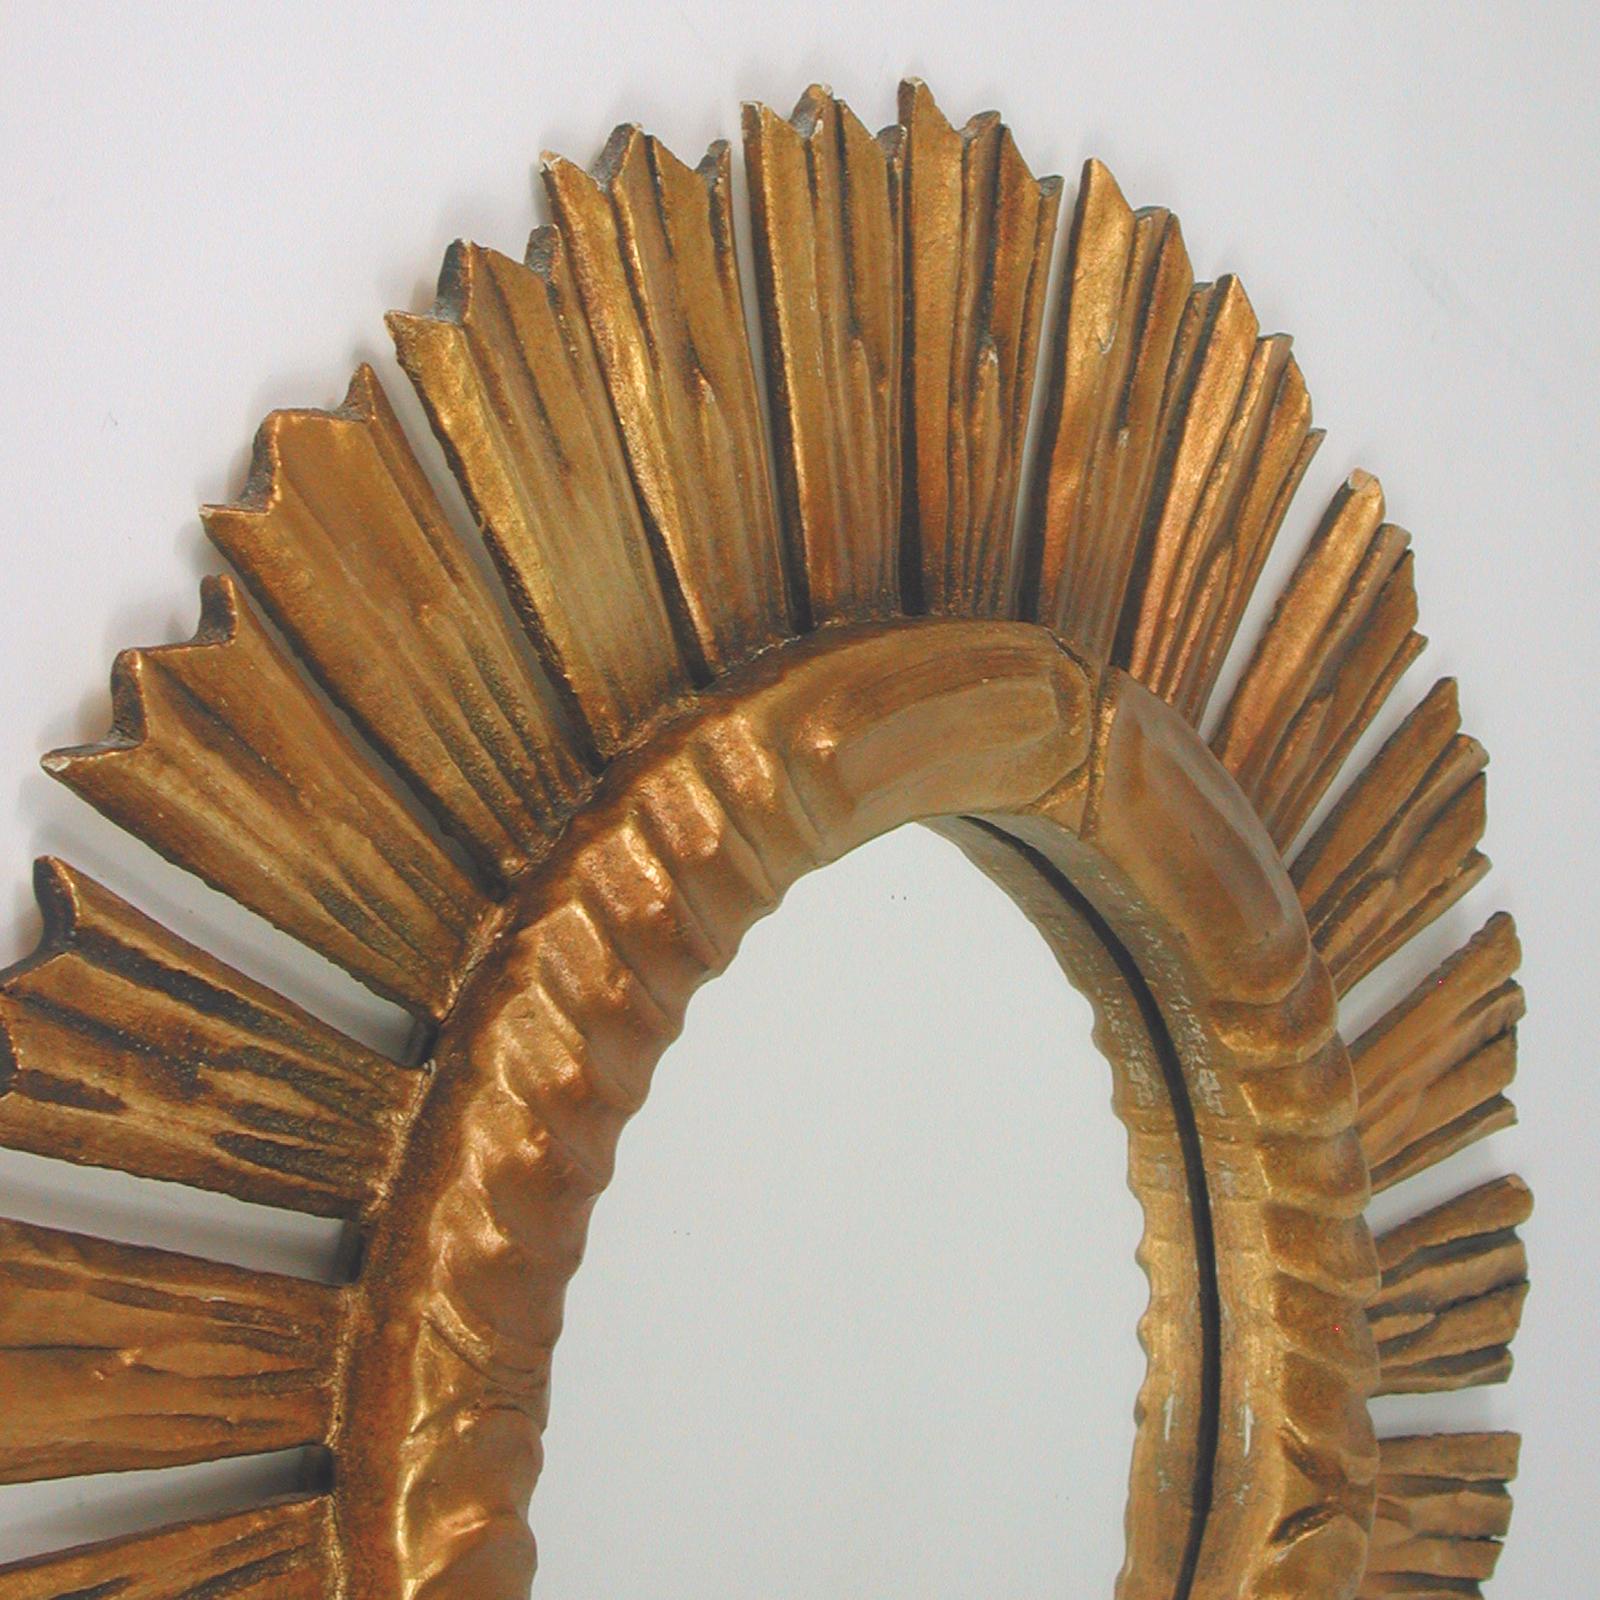 Spanish Sunburst Carved Giltwood Mirror, 1940s to 1950s For Sale 1